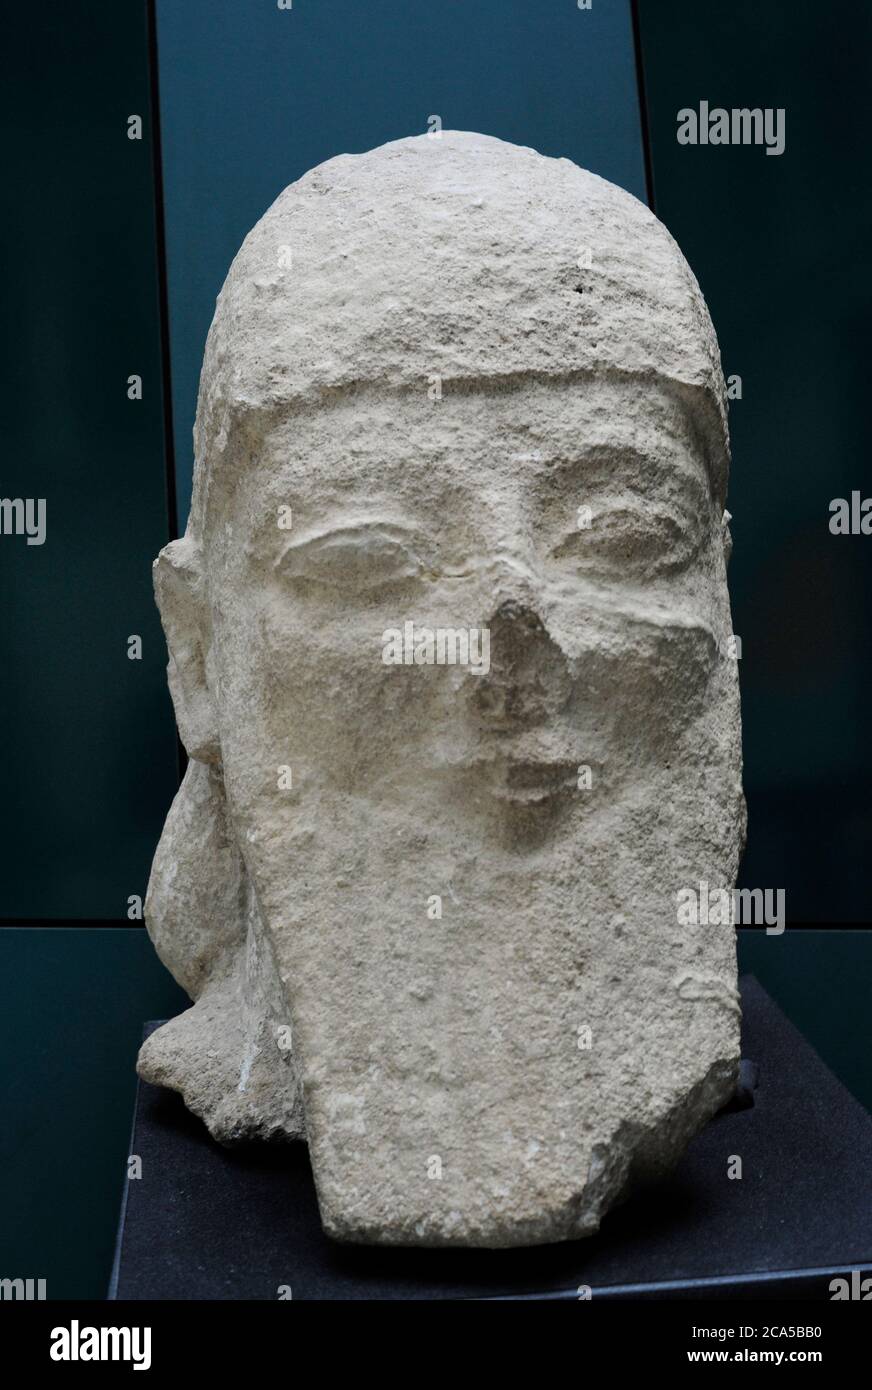 Colossal male head with square beard in Assyrian fashion, wearing pointed helmet. Limestone. 560-540 BC. From Kition, Cyprus. Museum of the Mediterranean and Near Eastern Antiquities. Stockholm, Sweden. Stock Photo